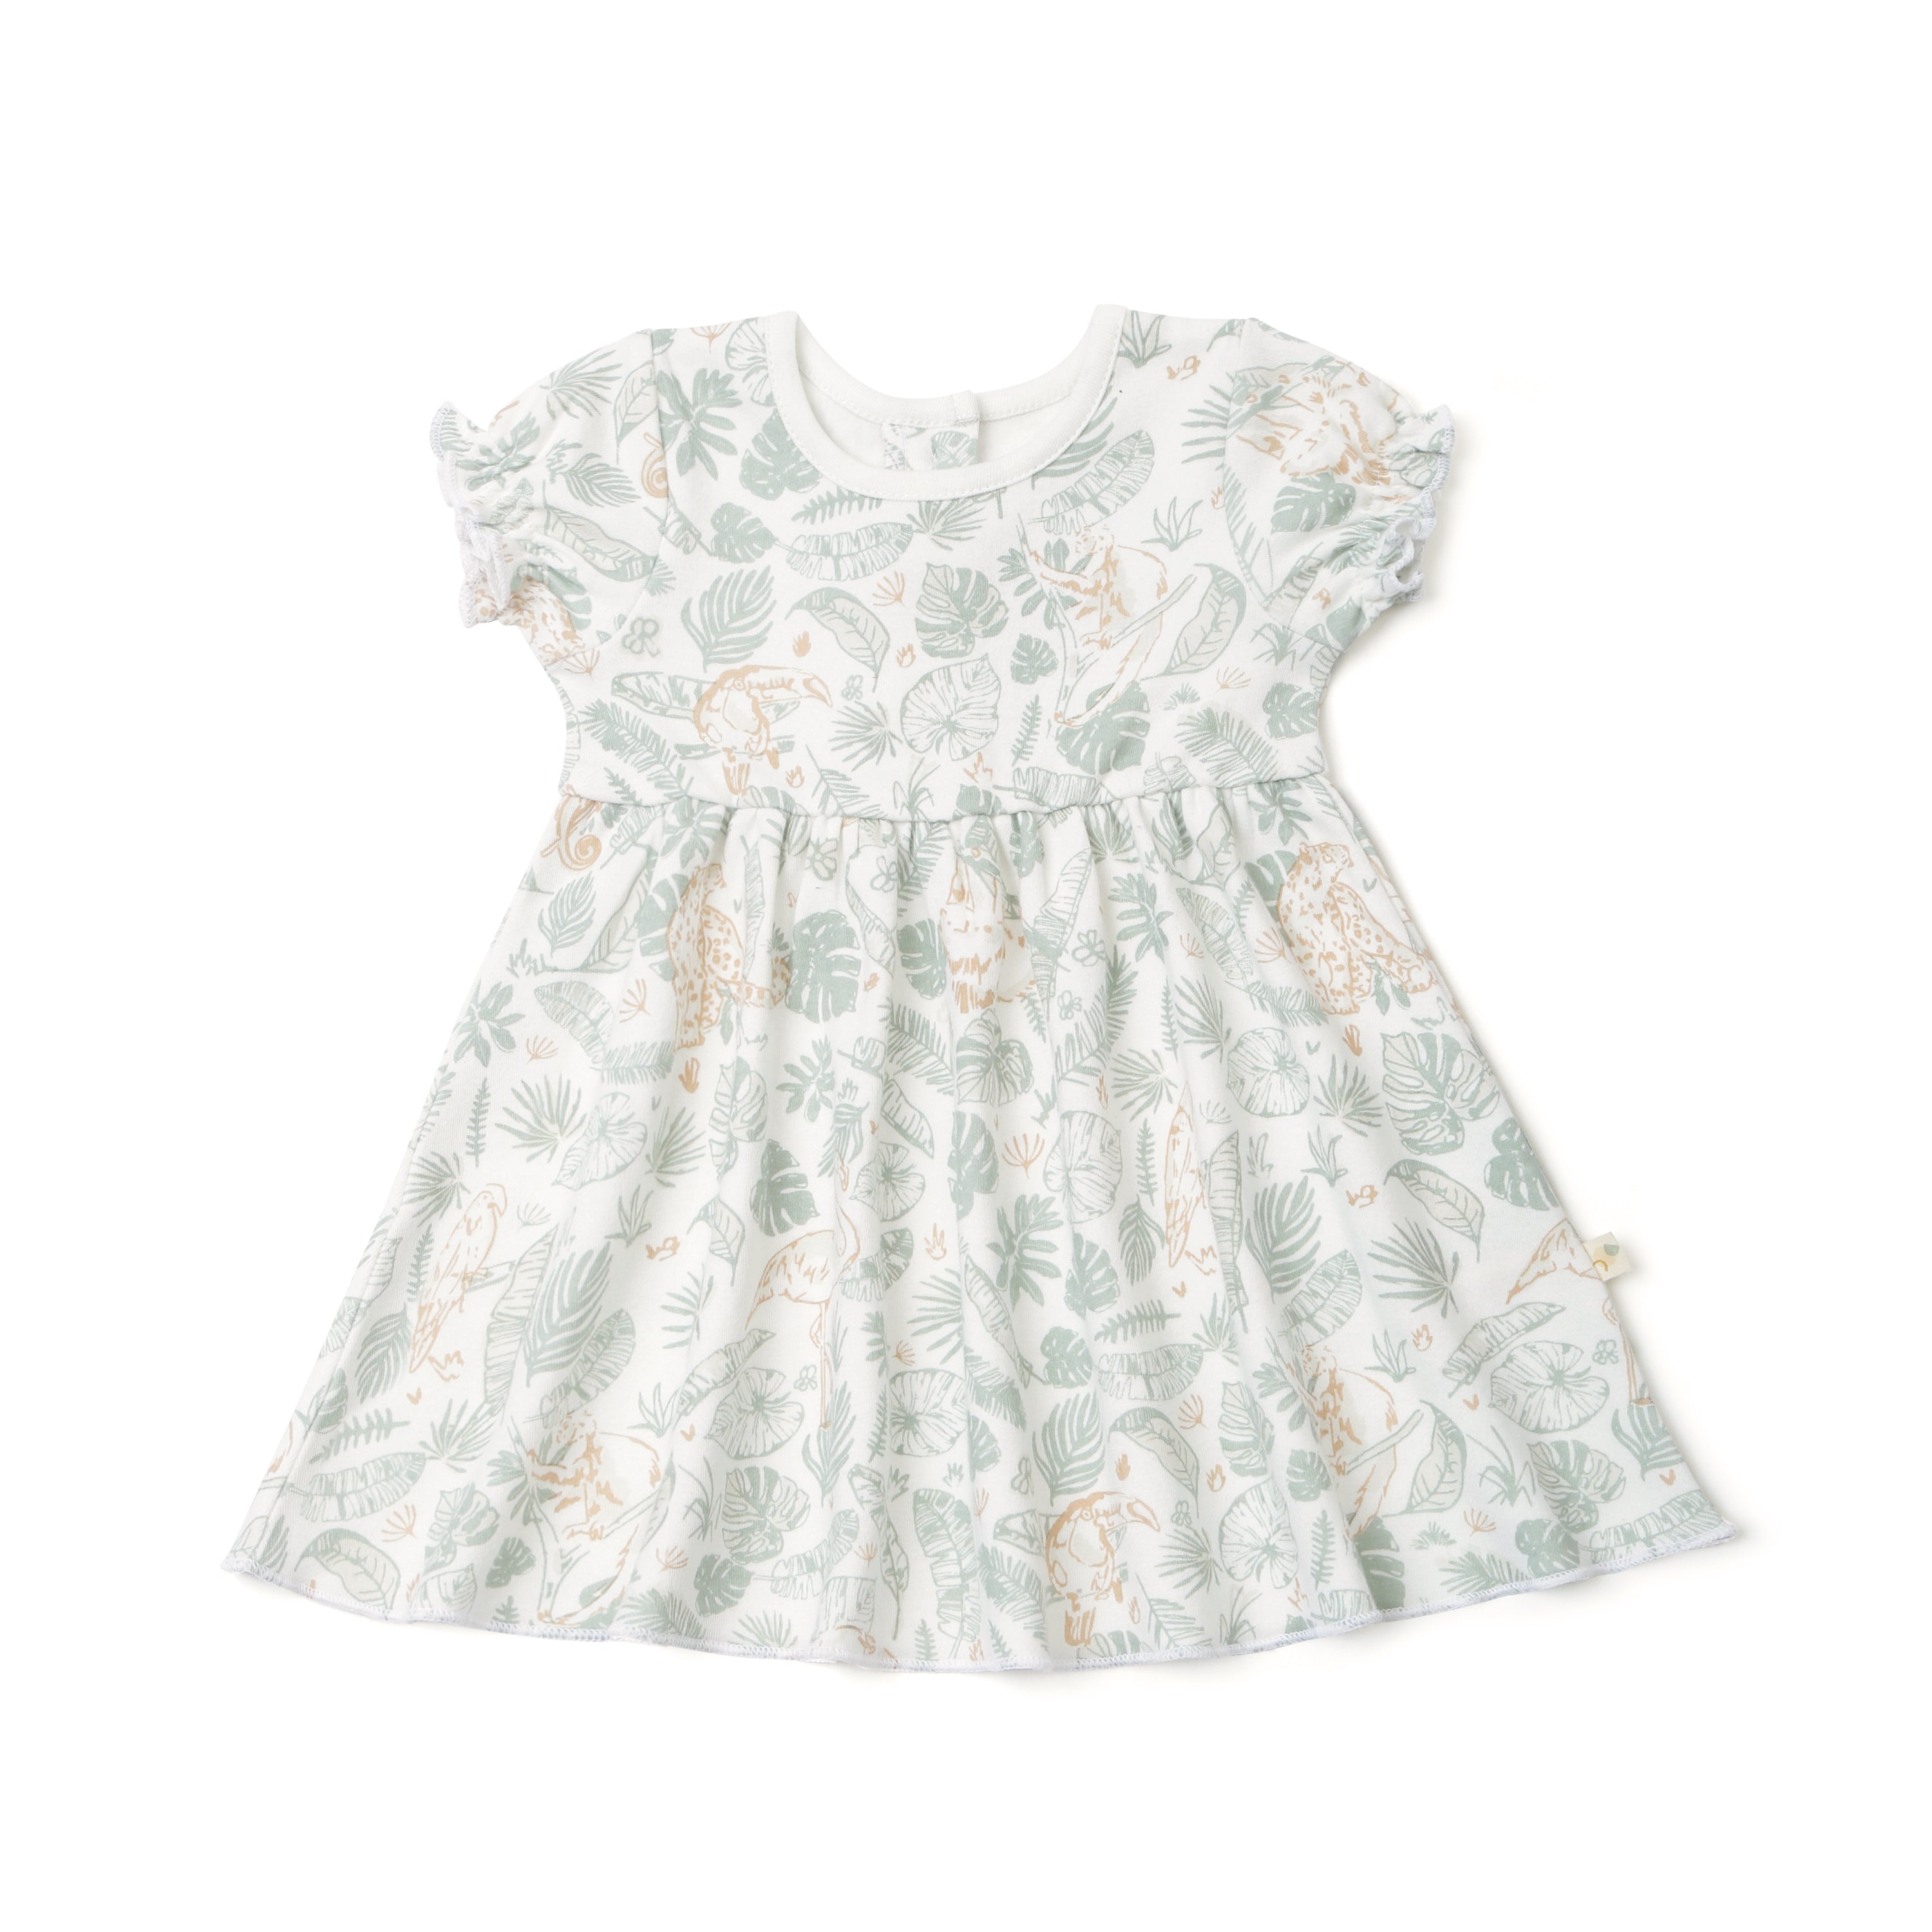 A toddler's Organic Puff Sleeve Dress in Wild Safari print from Organic Kids, neatly displayed isolated on a white background.